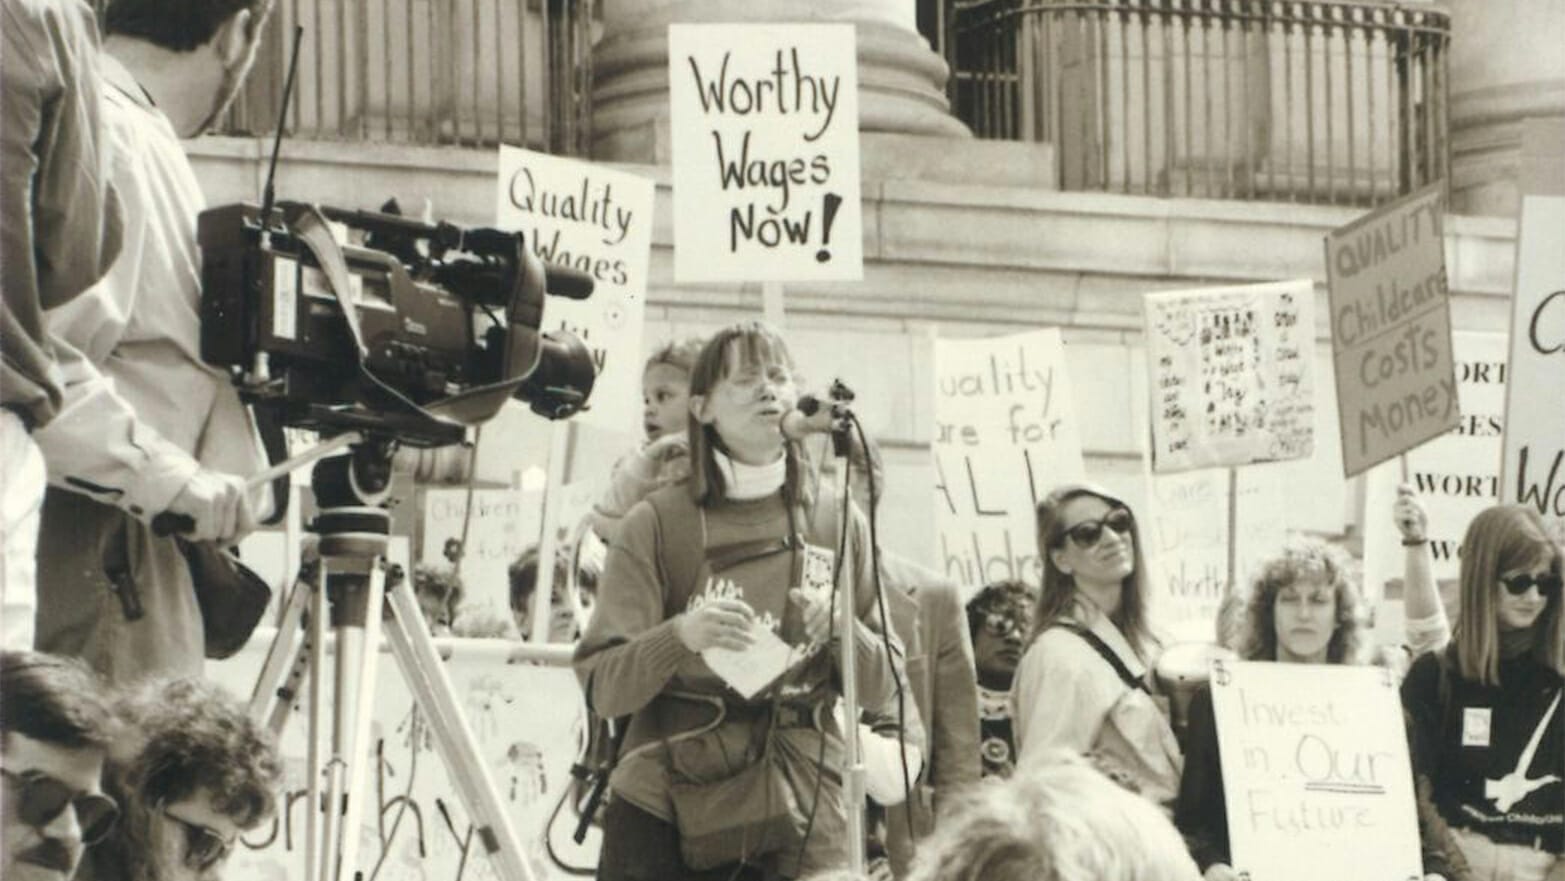 A black and white photo of a rally advocating for worthy wages now